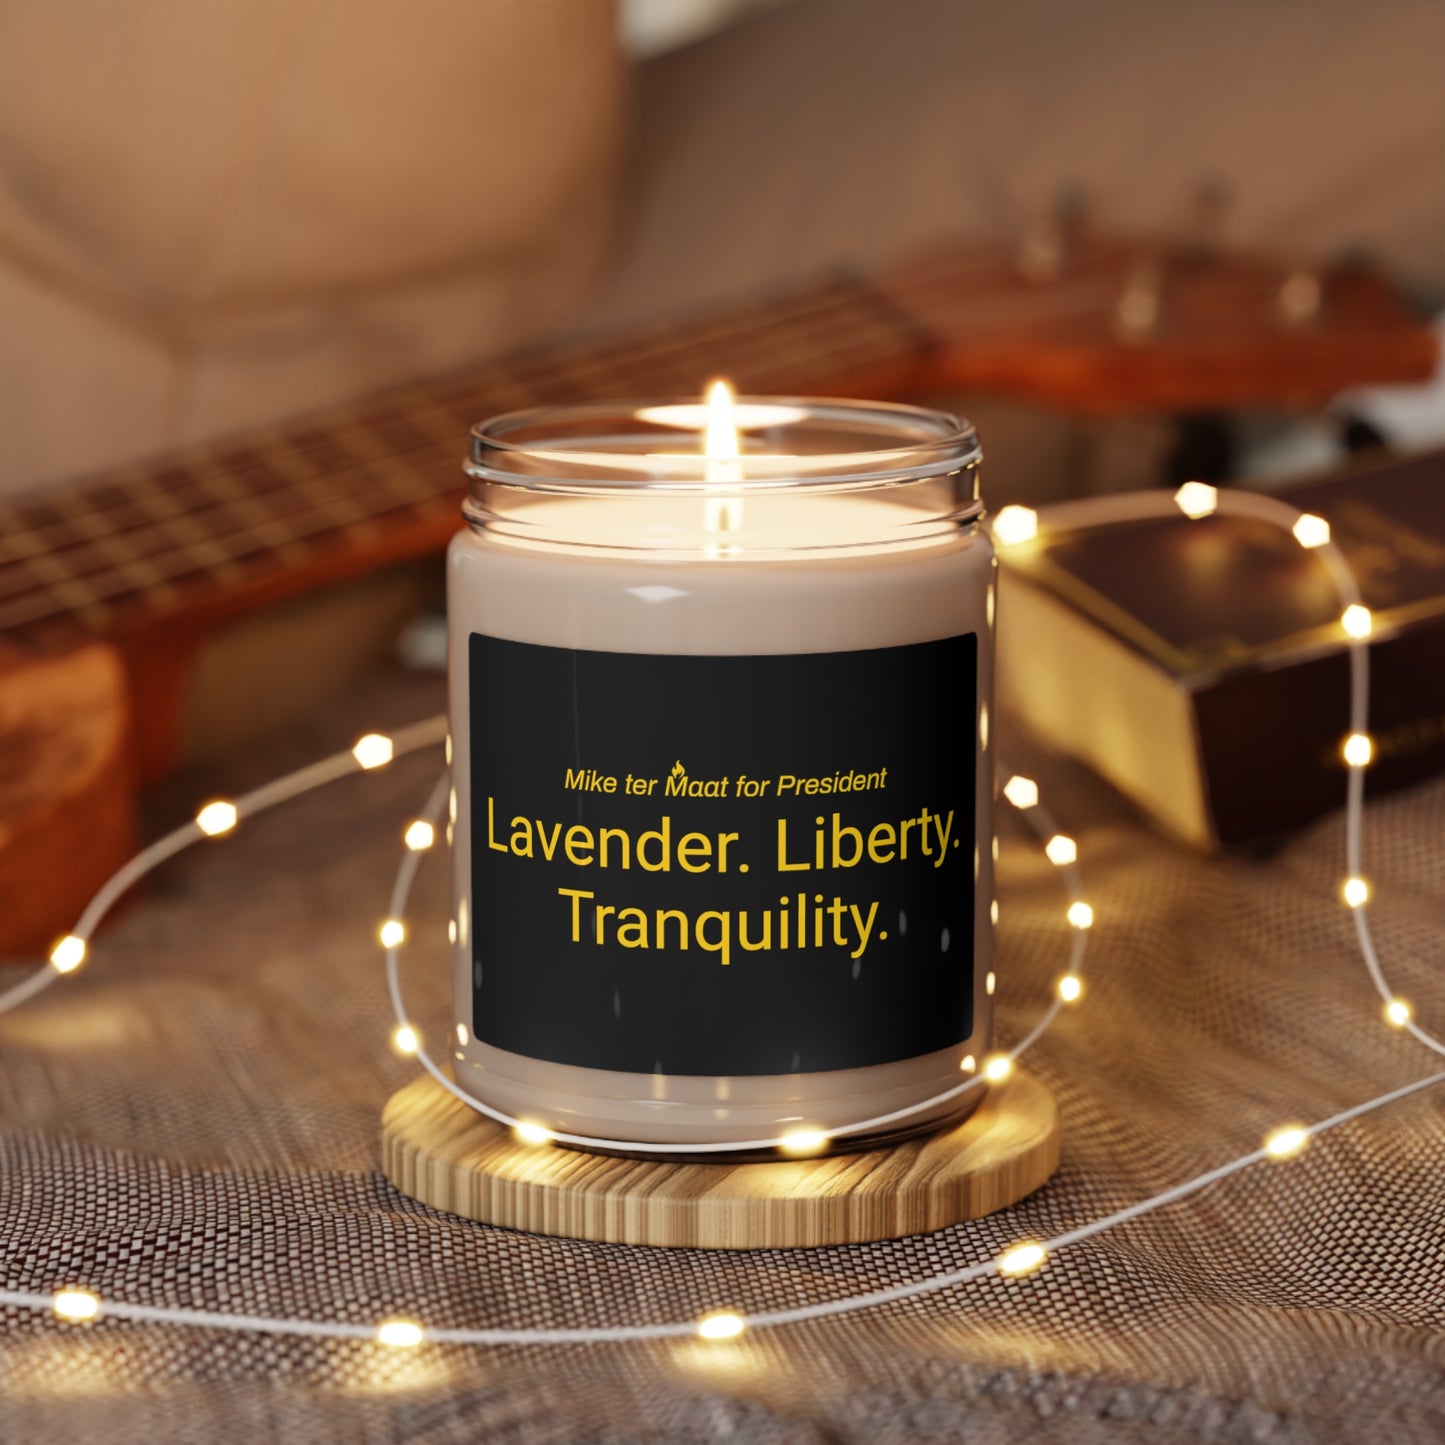 Lavender Liberty Tranquility Scented Soy Candle, 9oz